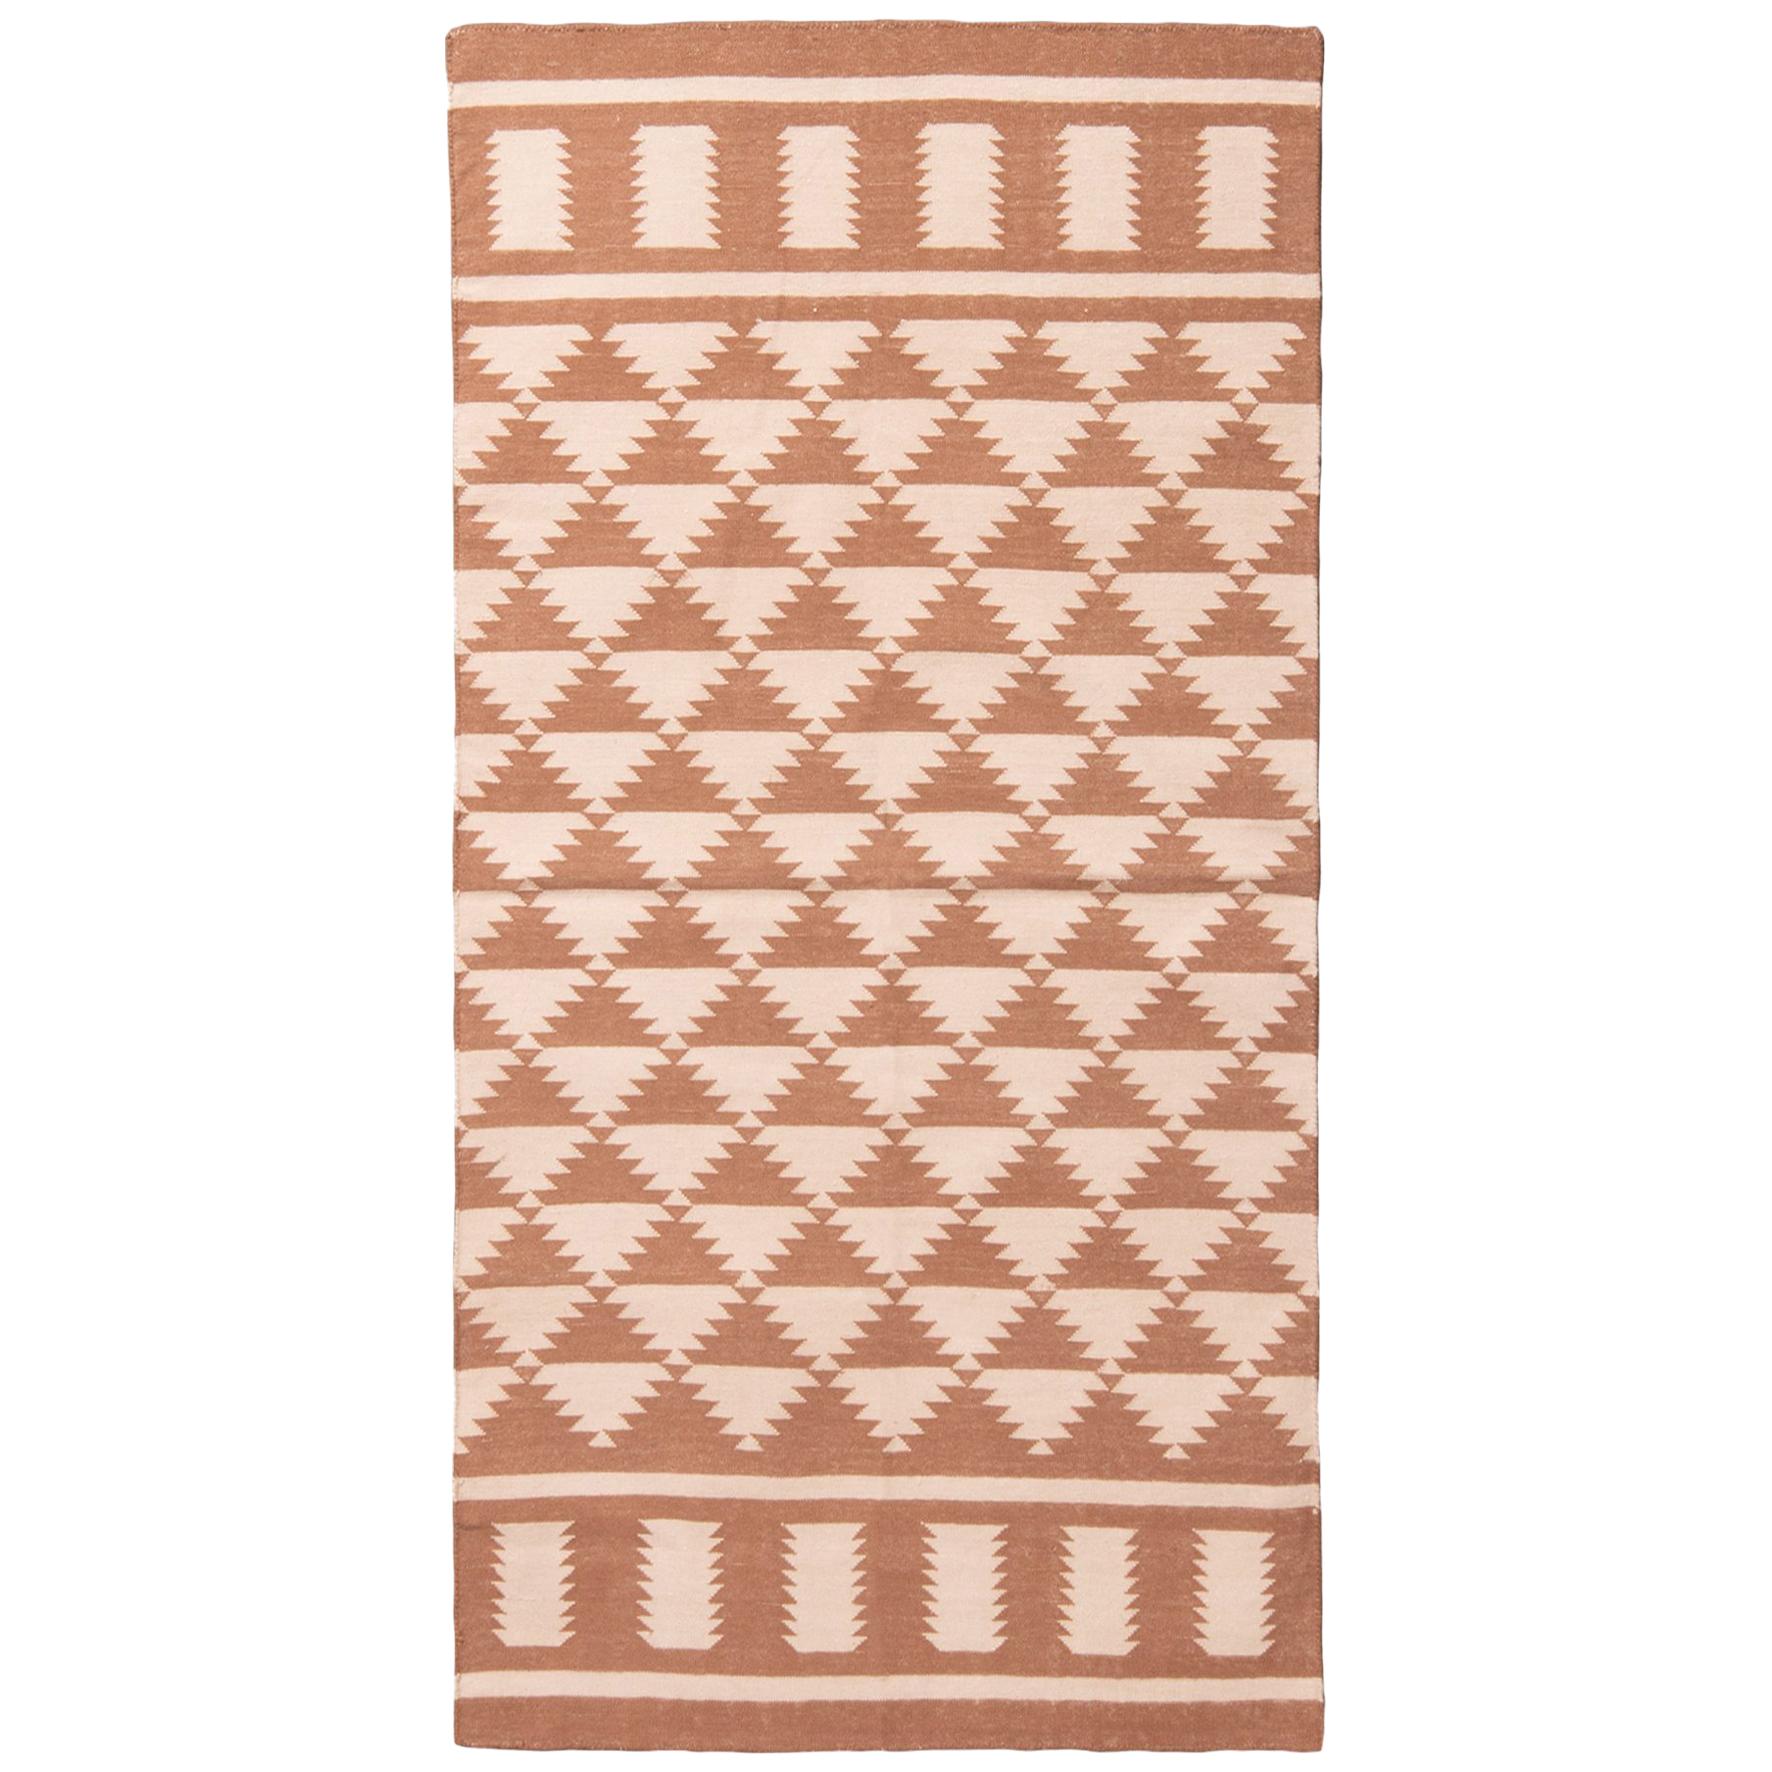 New Geometric Brown and Beige Cotton Rug